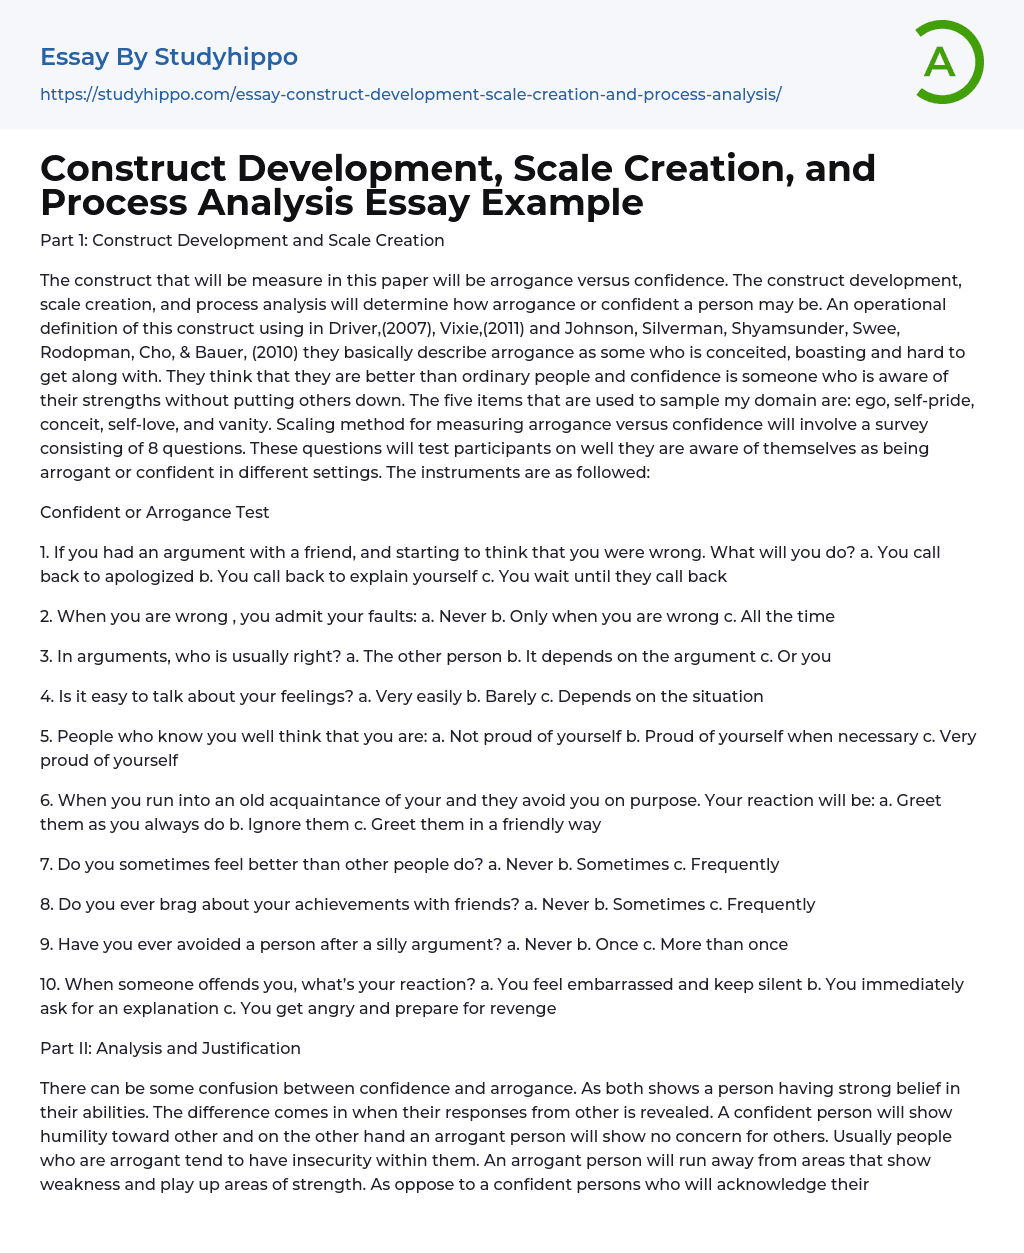 Construct Development, Scale Creation, and Process Analysis Essay Example